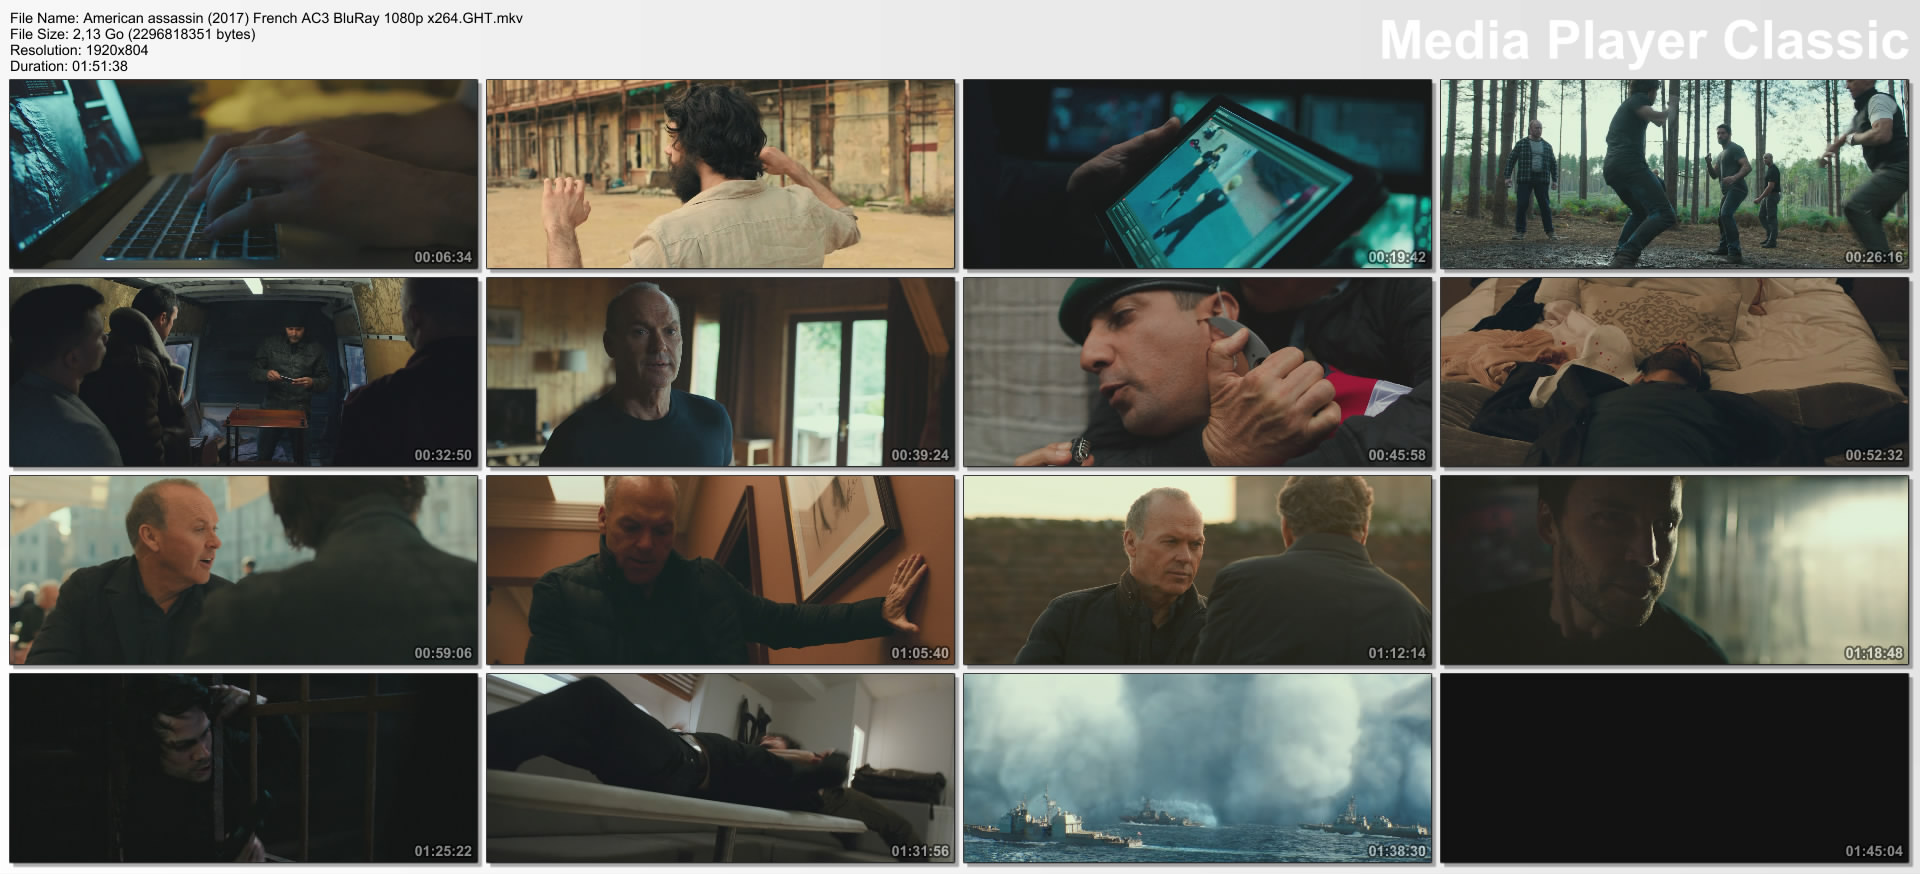 American assassin (2017) French AC3 BluRay 1080p x264.GHT